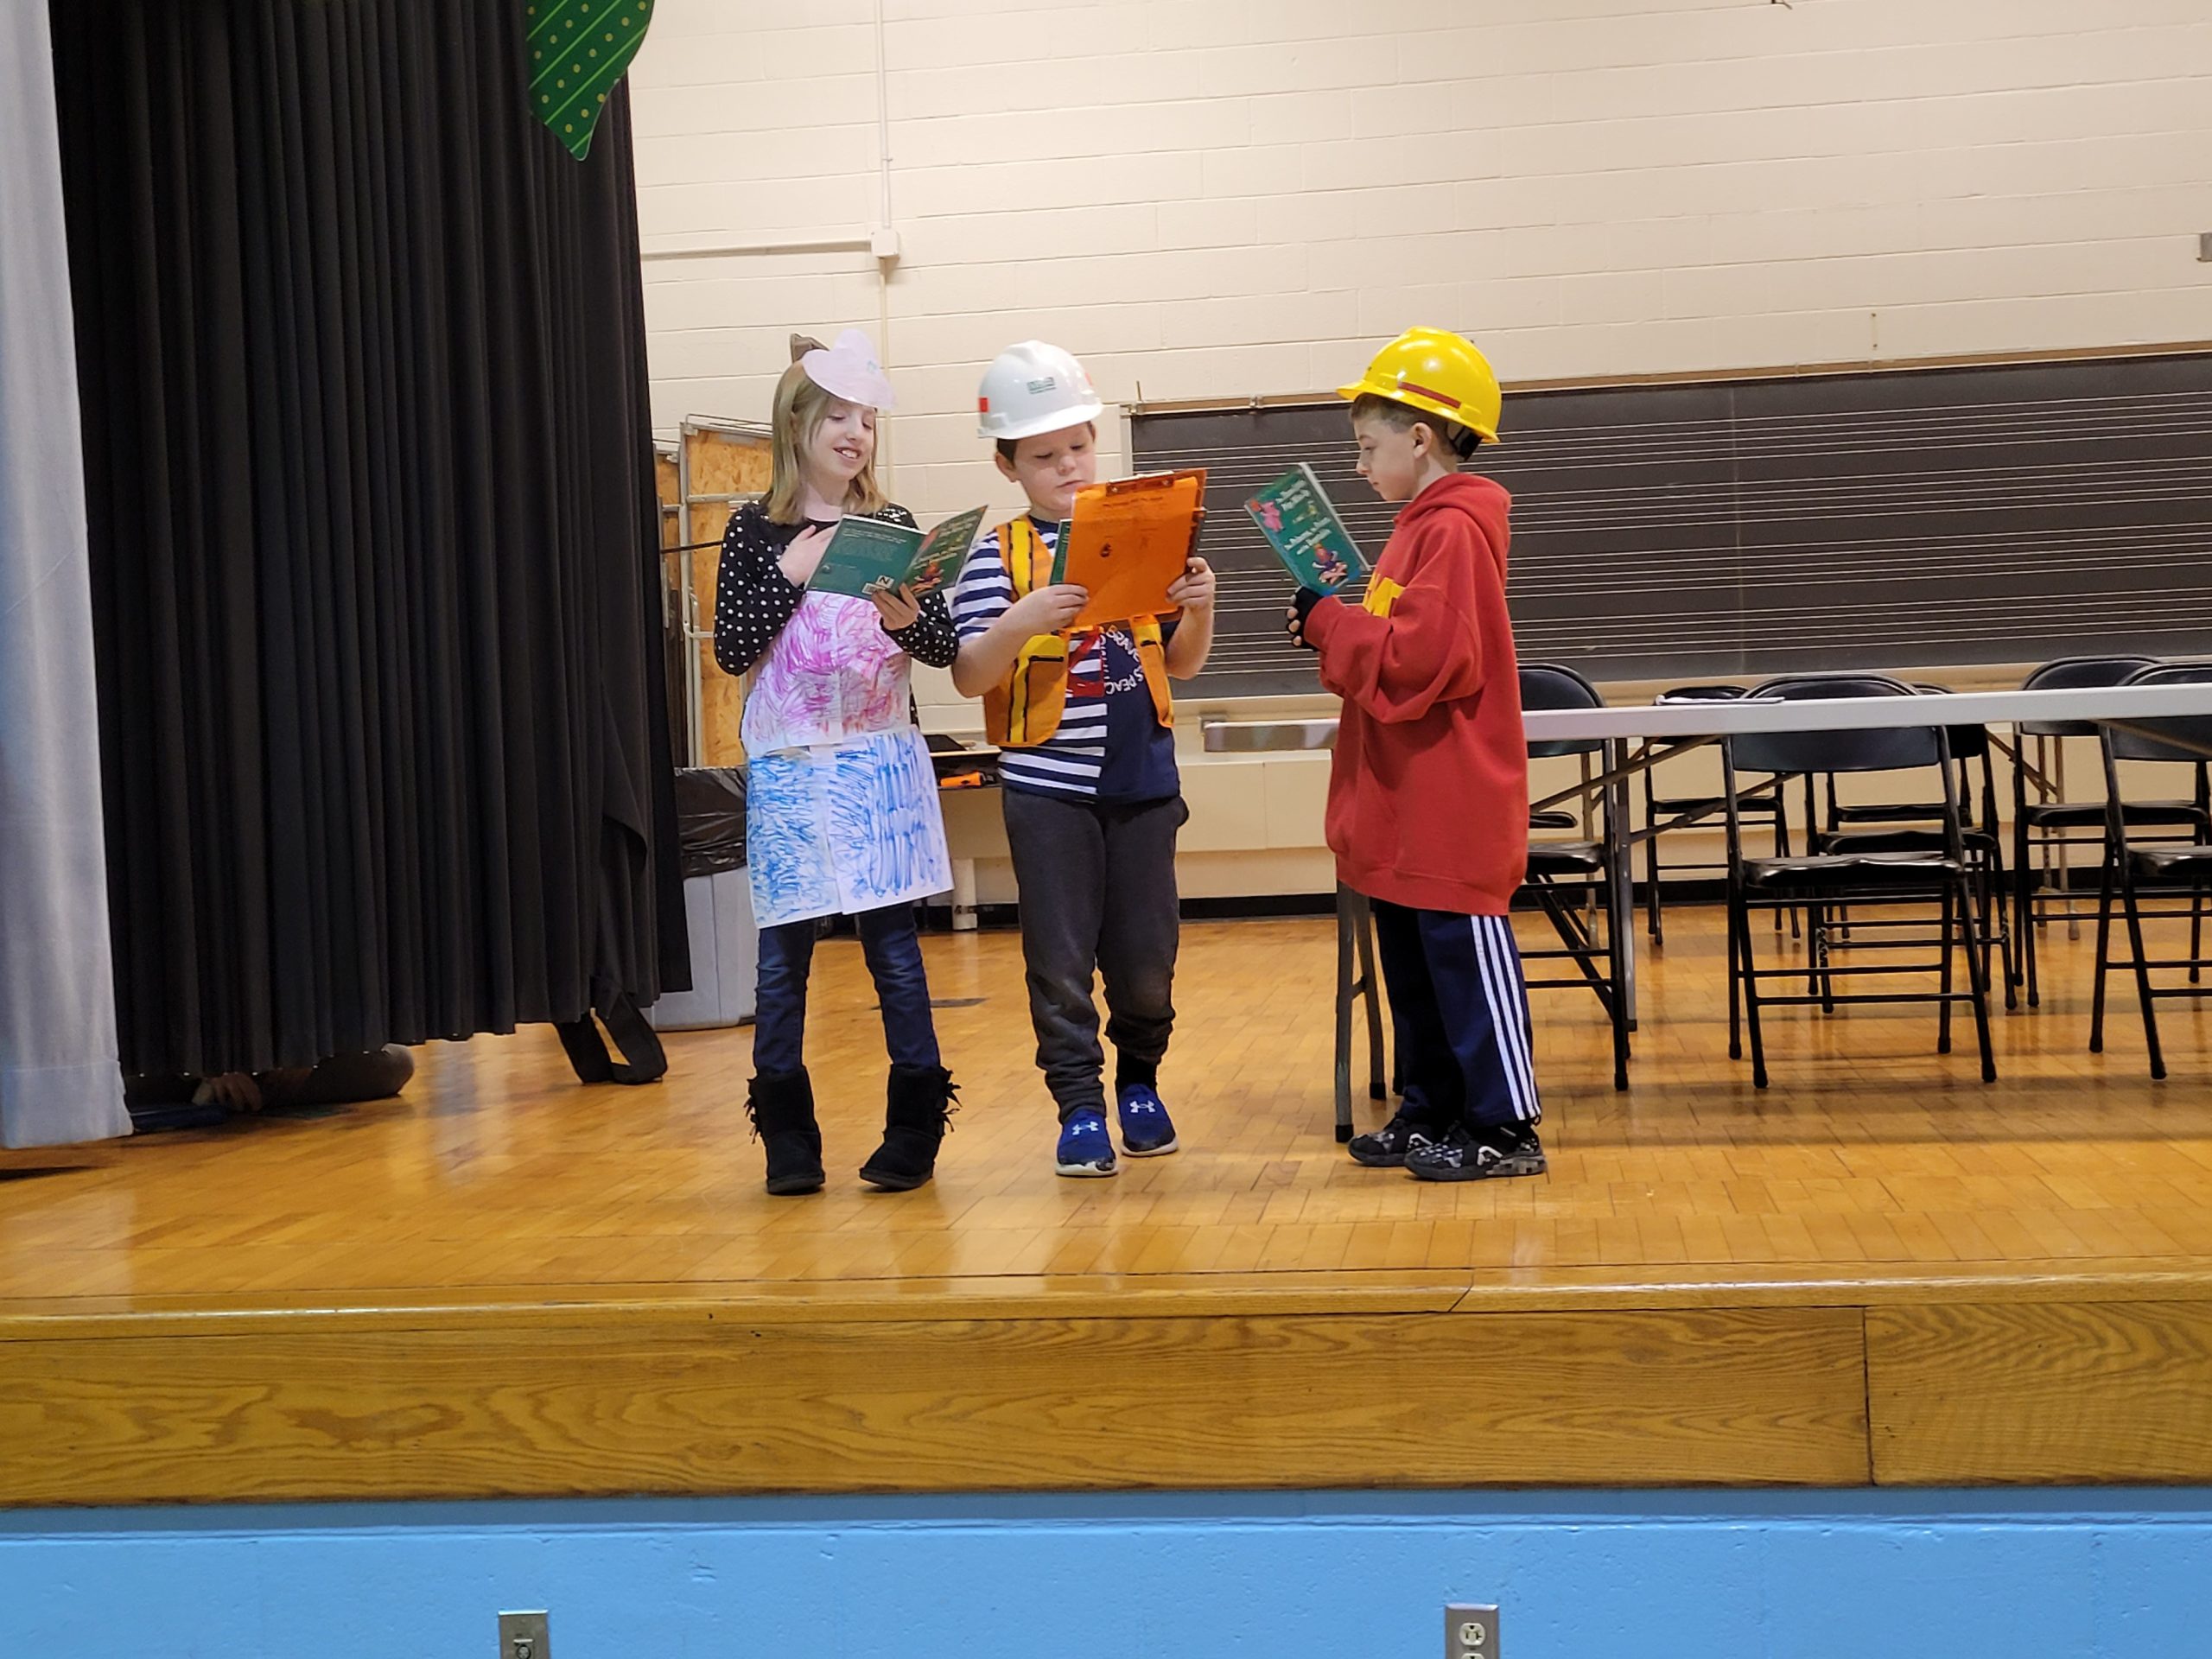 3rd grade students participated in a reader’s theater “The Three Little Pigs Wise Up”